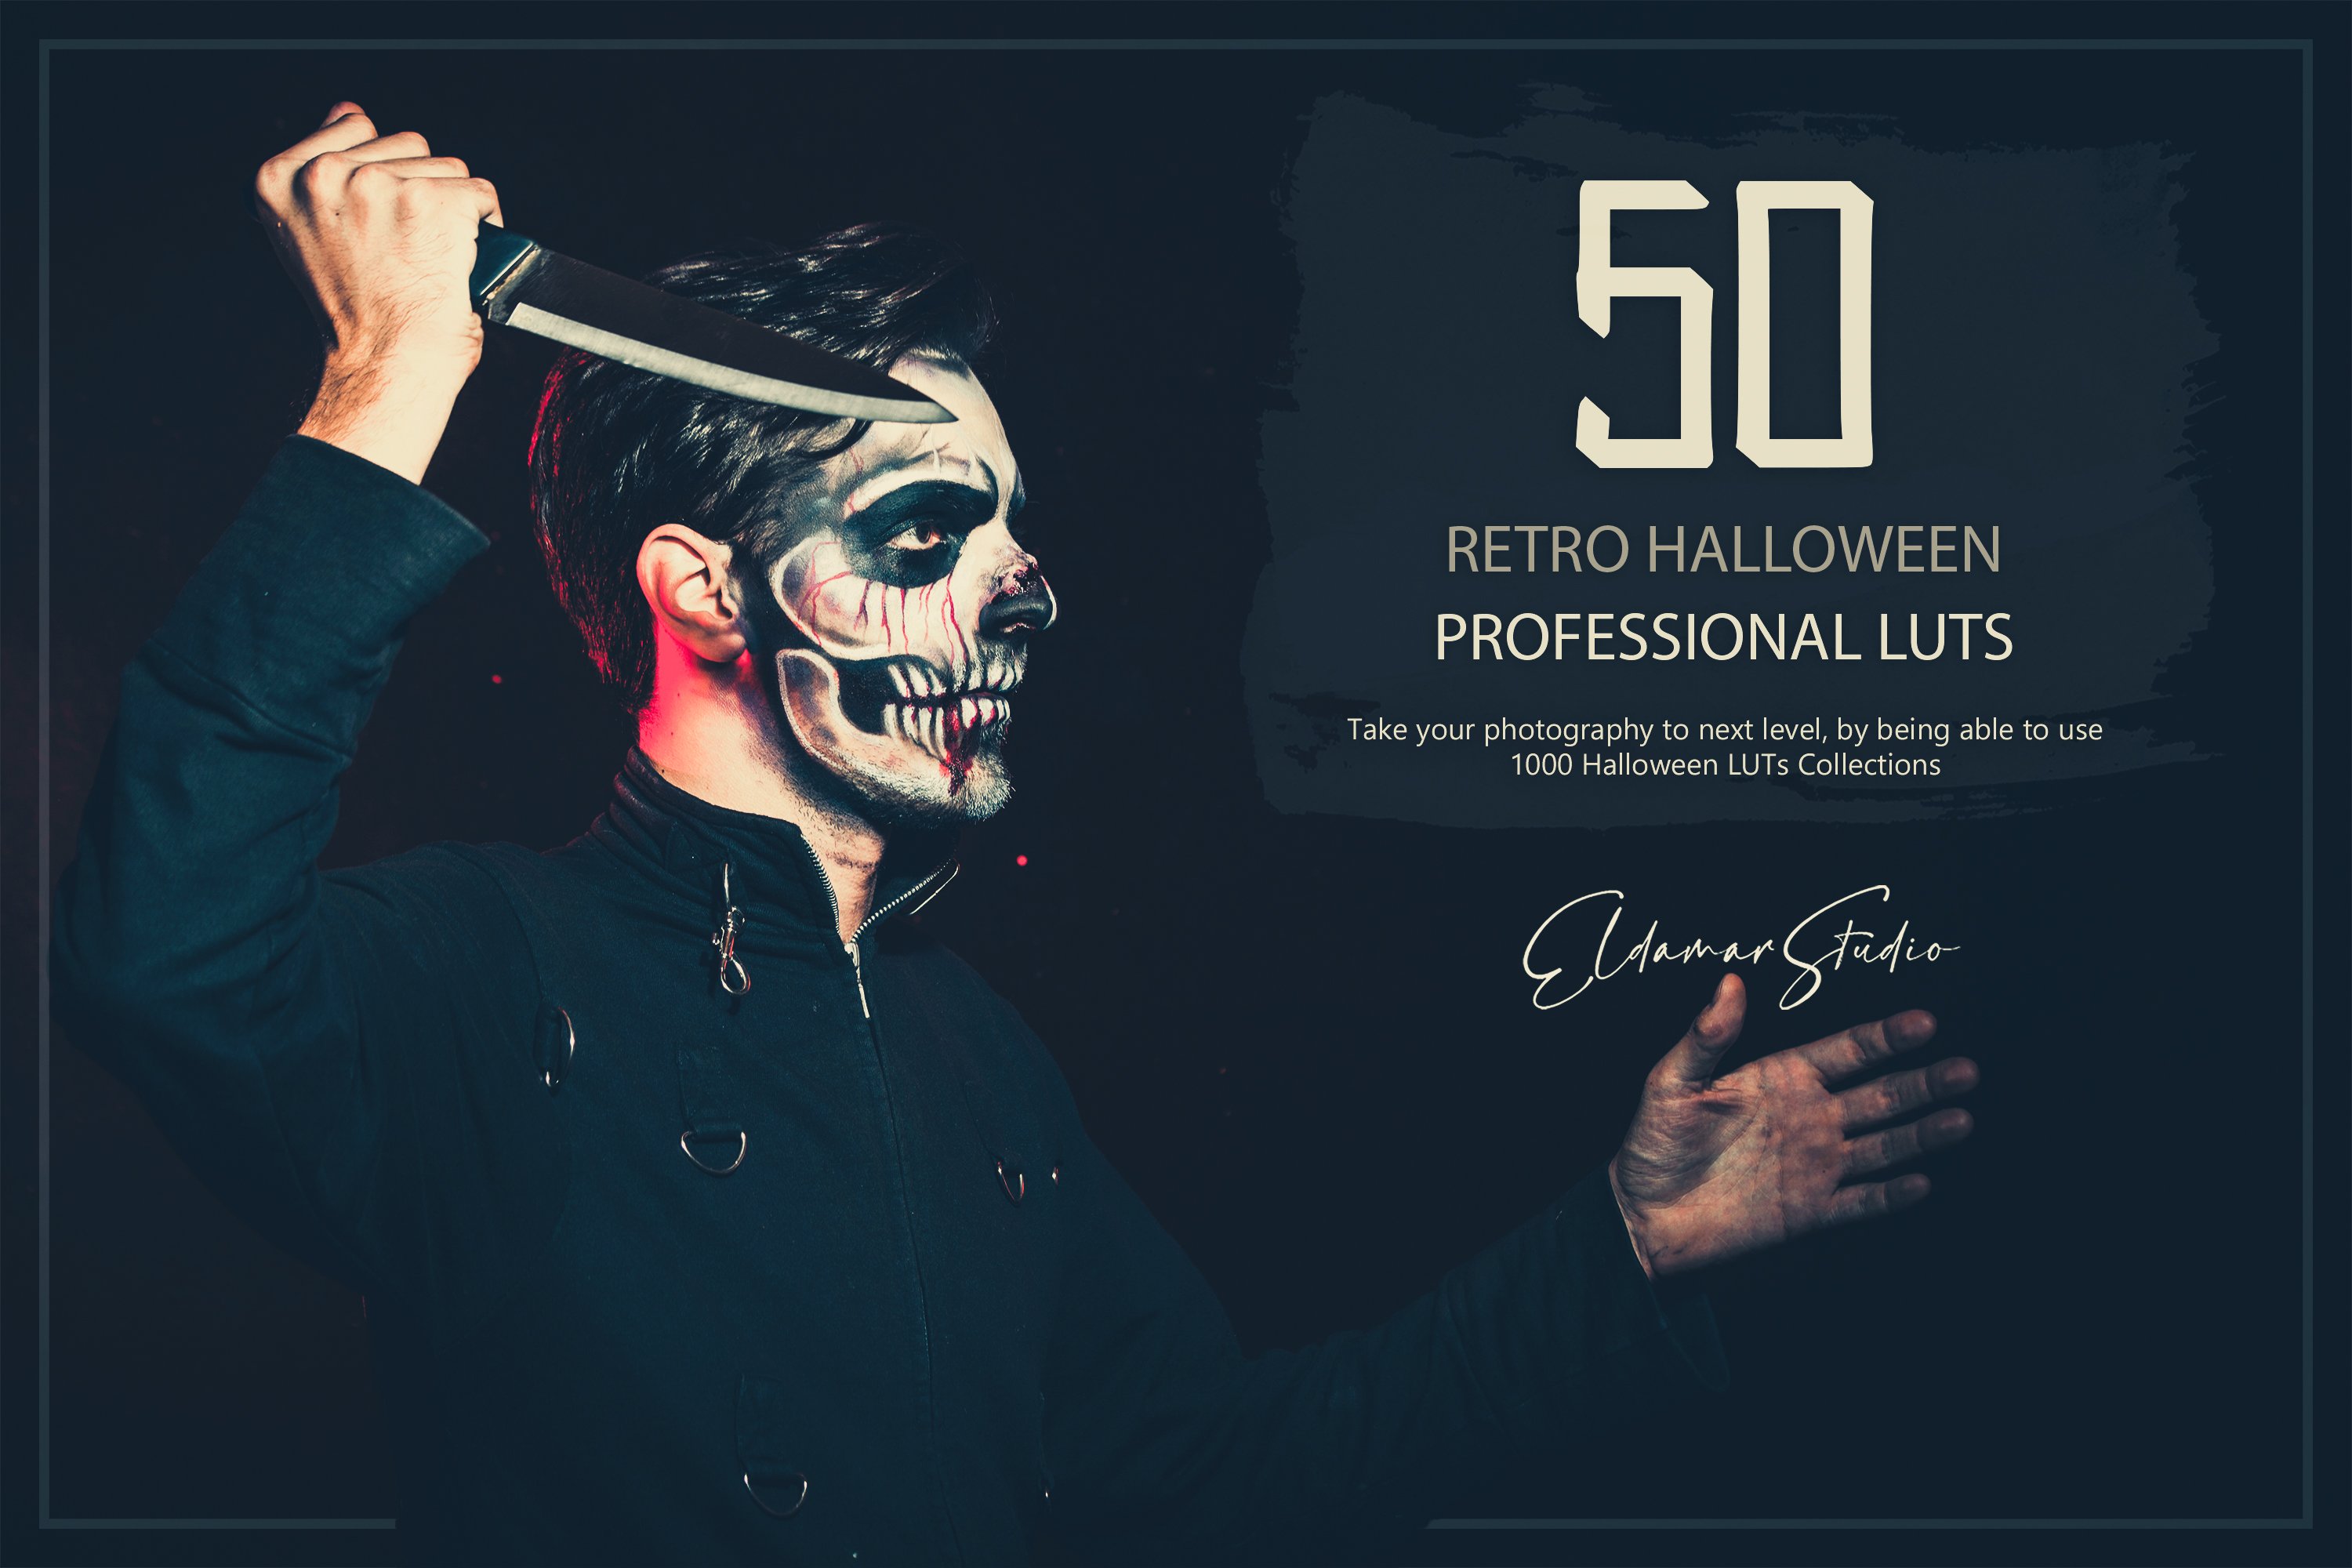 50 Retro Halloween LUTs and Presetscover image.